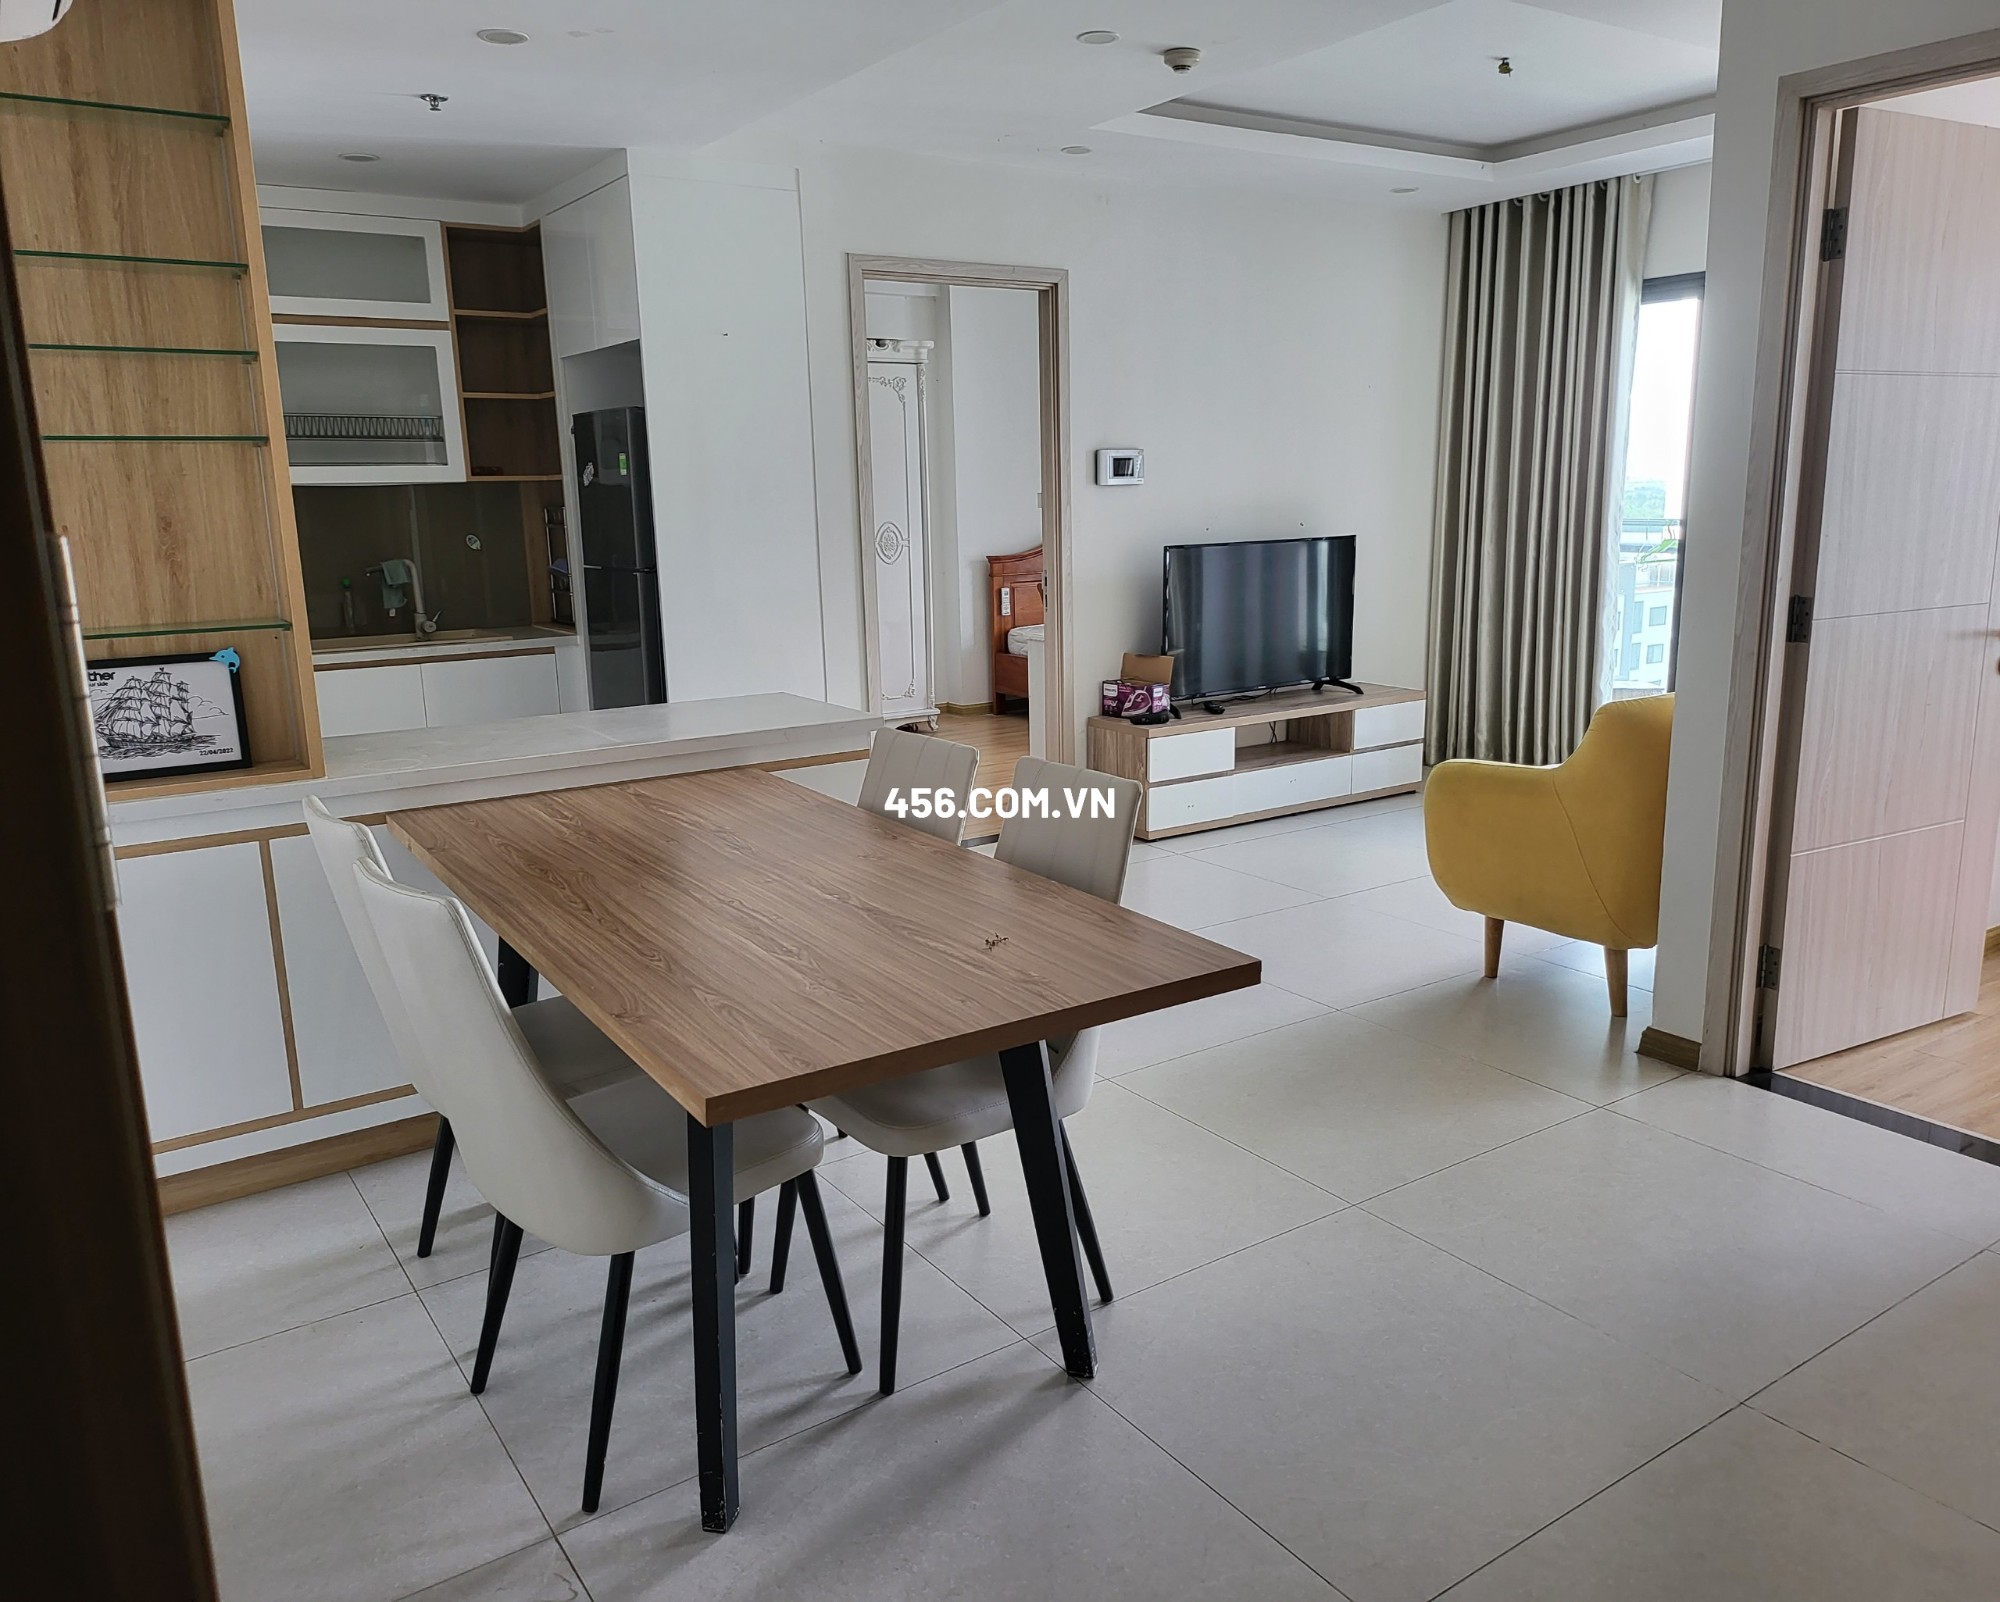 Hinh-3 Bedrooms New City Thu Thiem Apartment For Rent Cheap Price